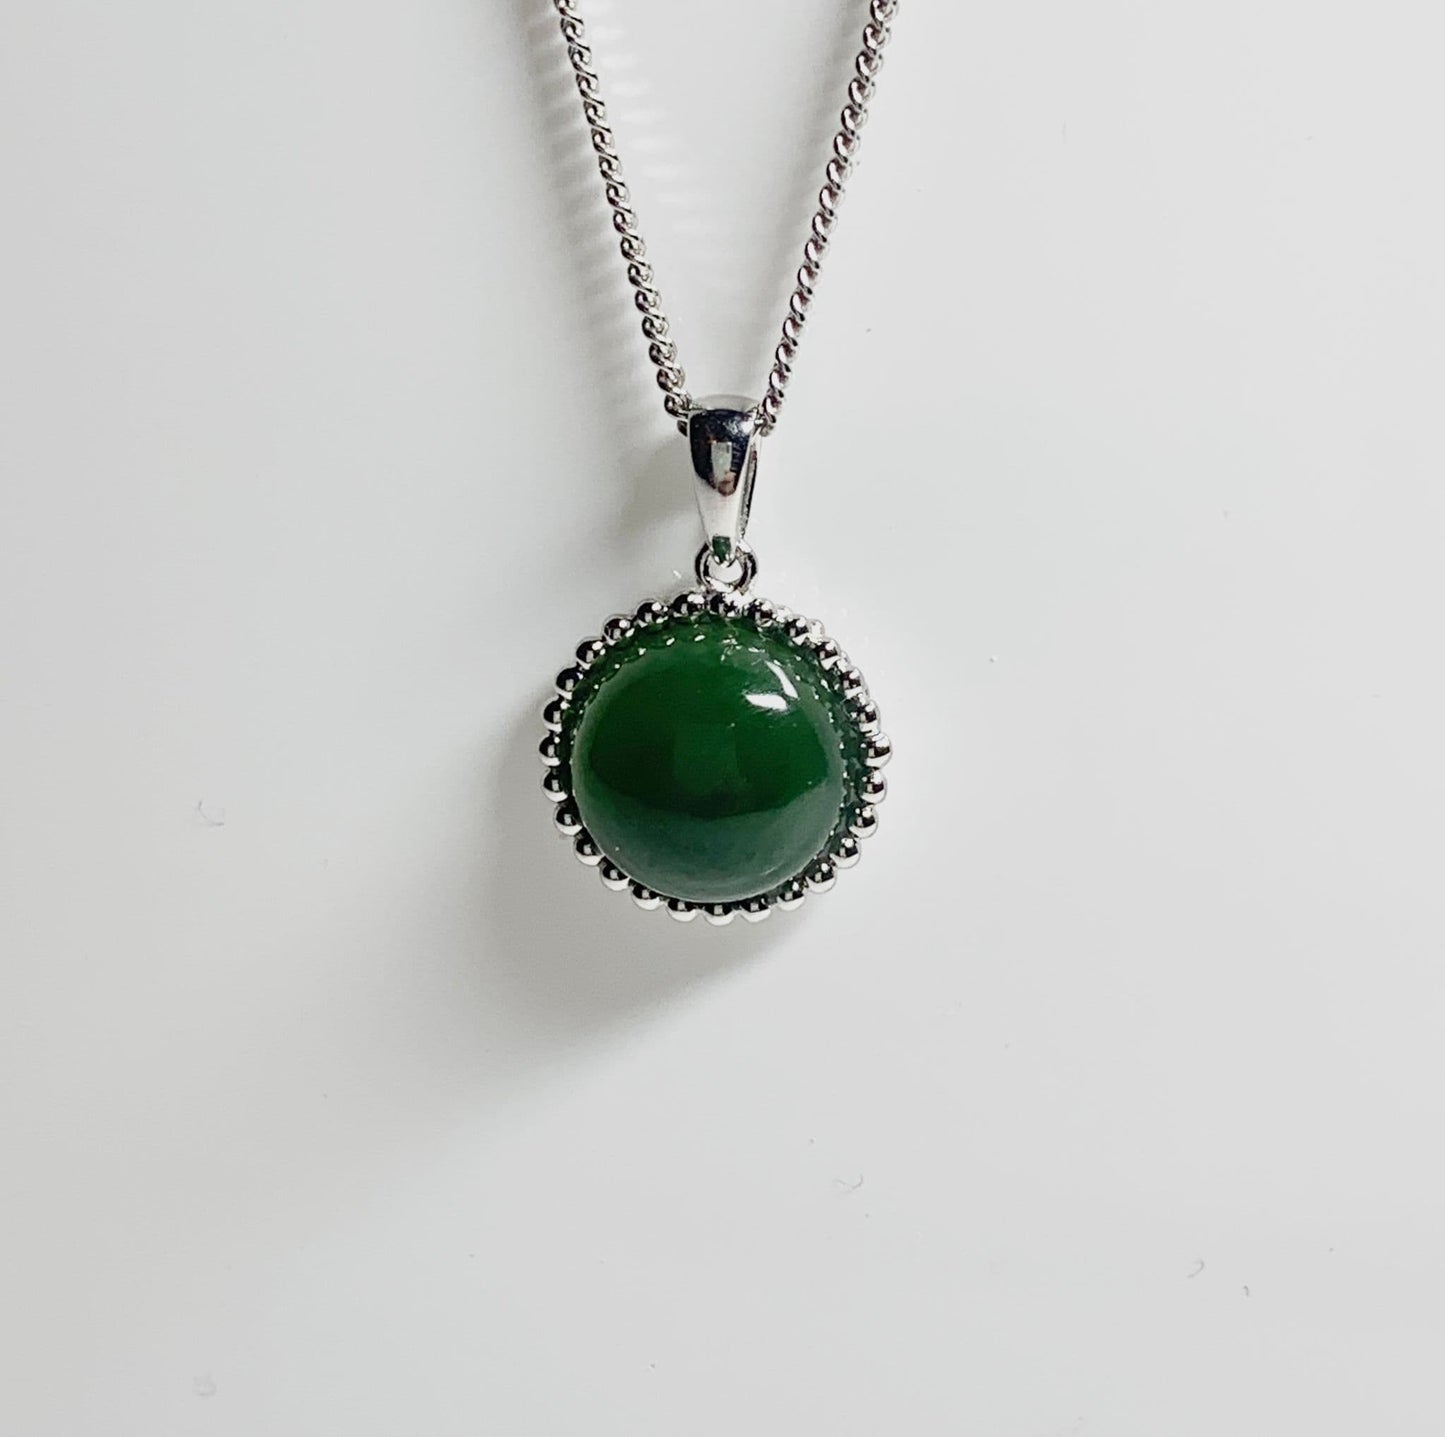 Round green jade patterned bobbled necklace sterling silver pendant